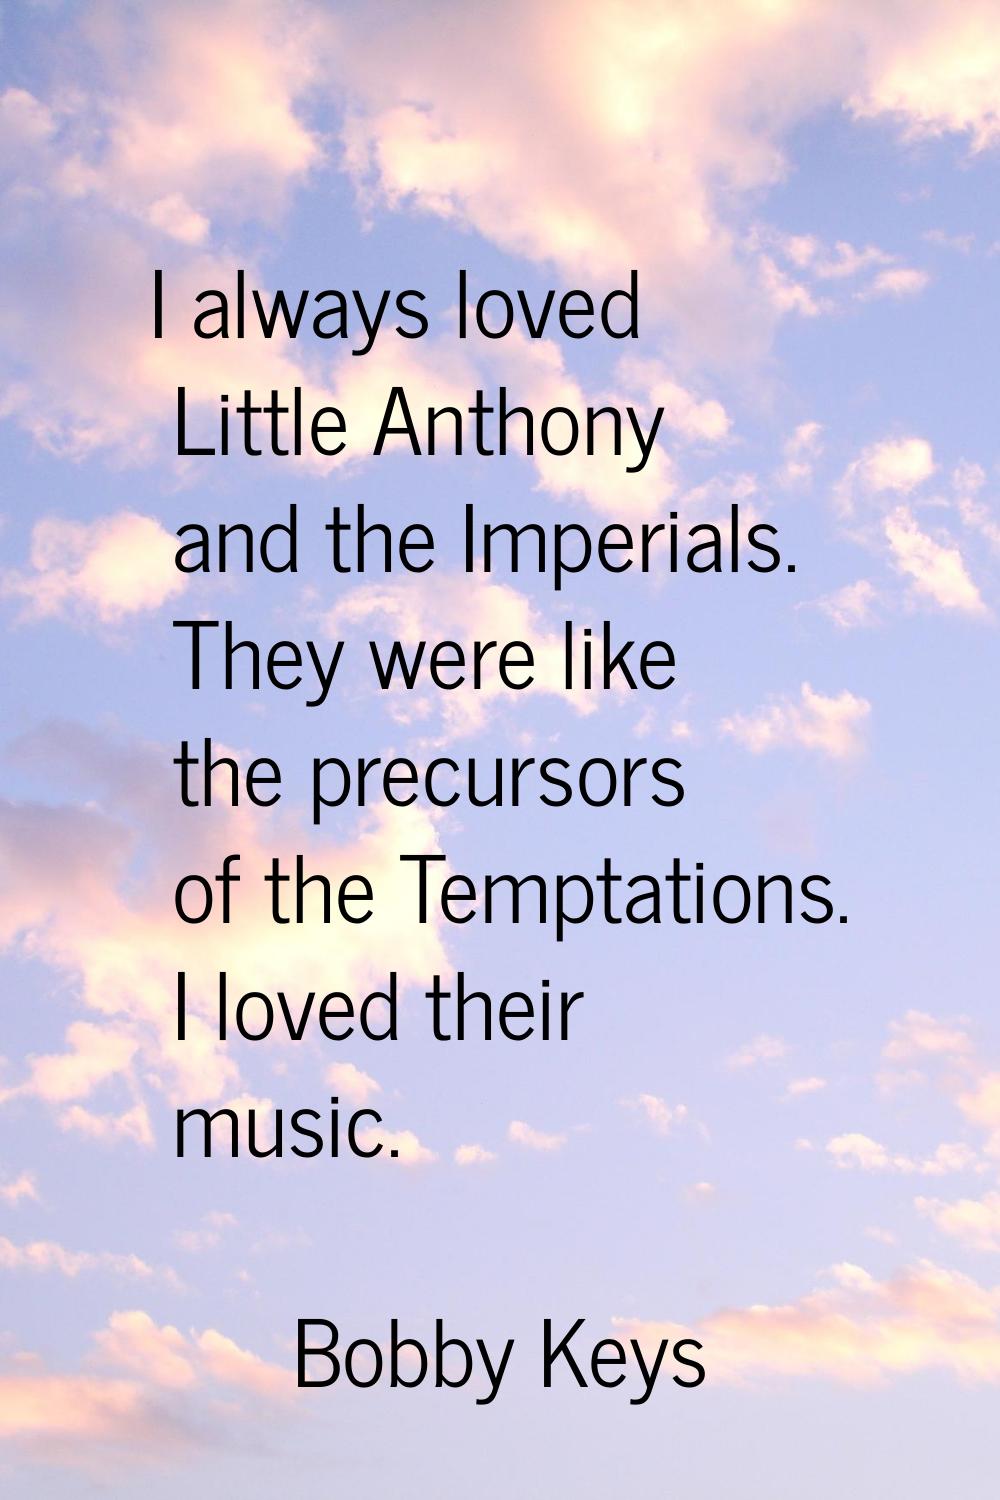 I always loved Little Anthony and the Imperials. They were like the precursors of the Temptations. 